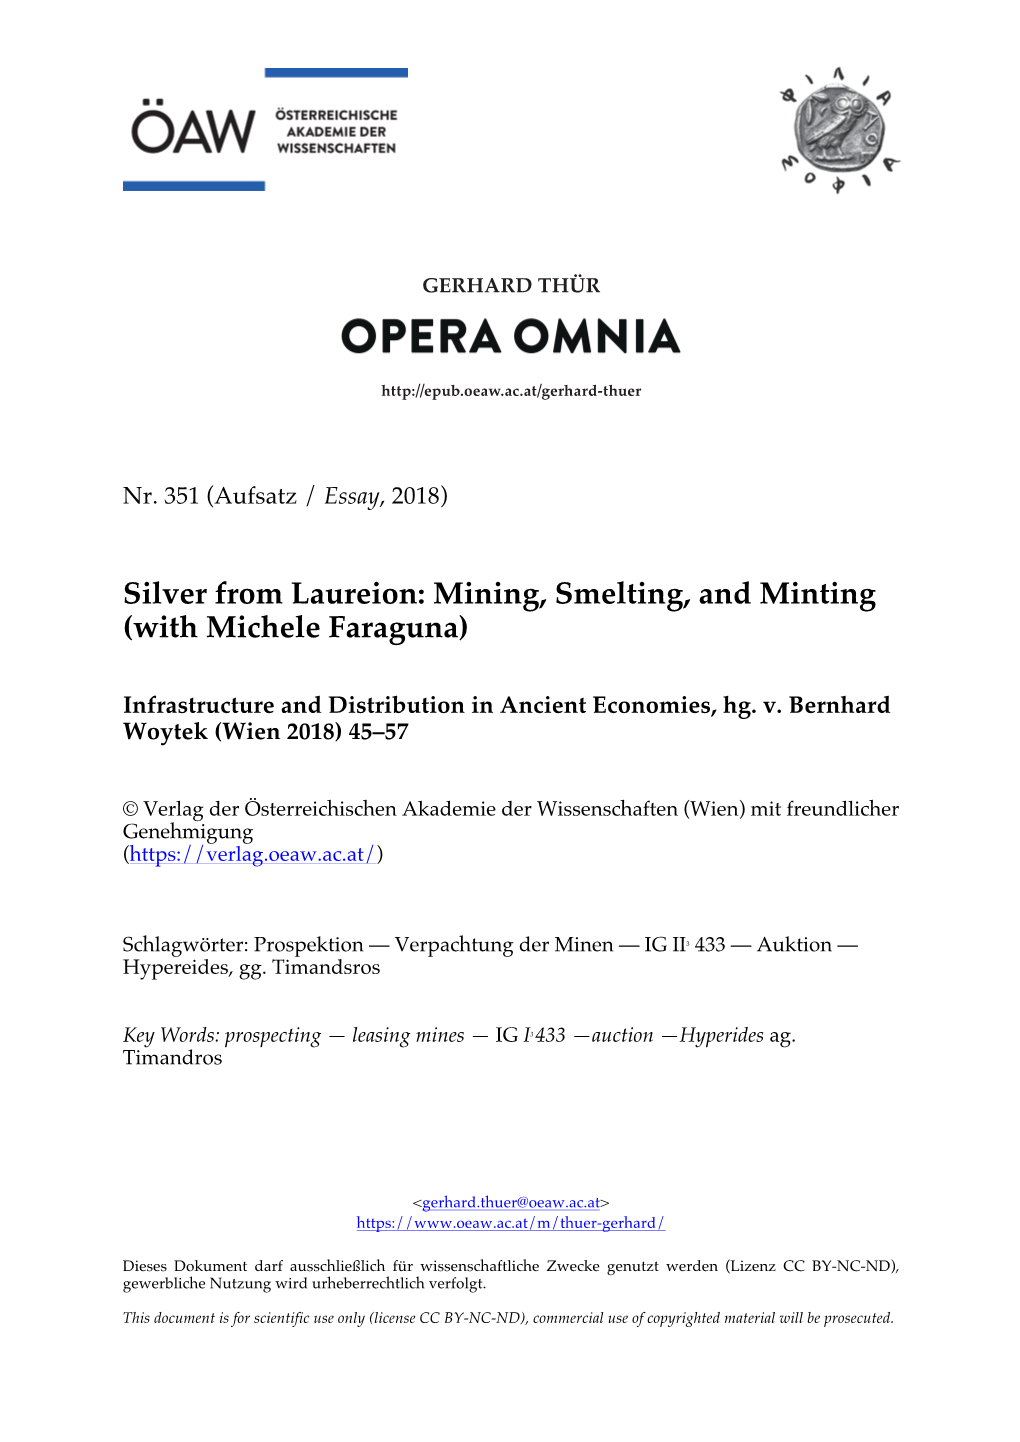 Silver from Laureion: Mining, Smelting, and Minting (With Michele Faraguna)